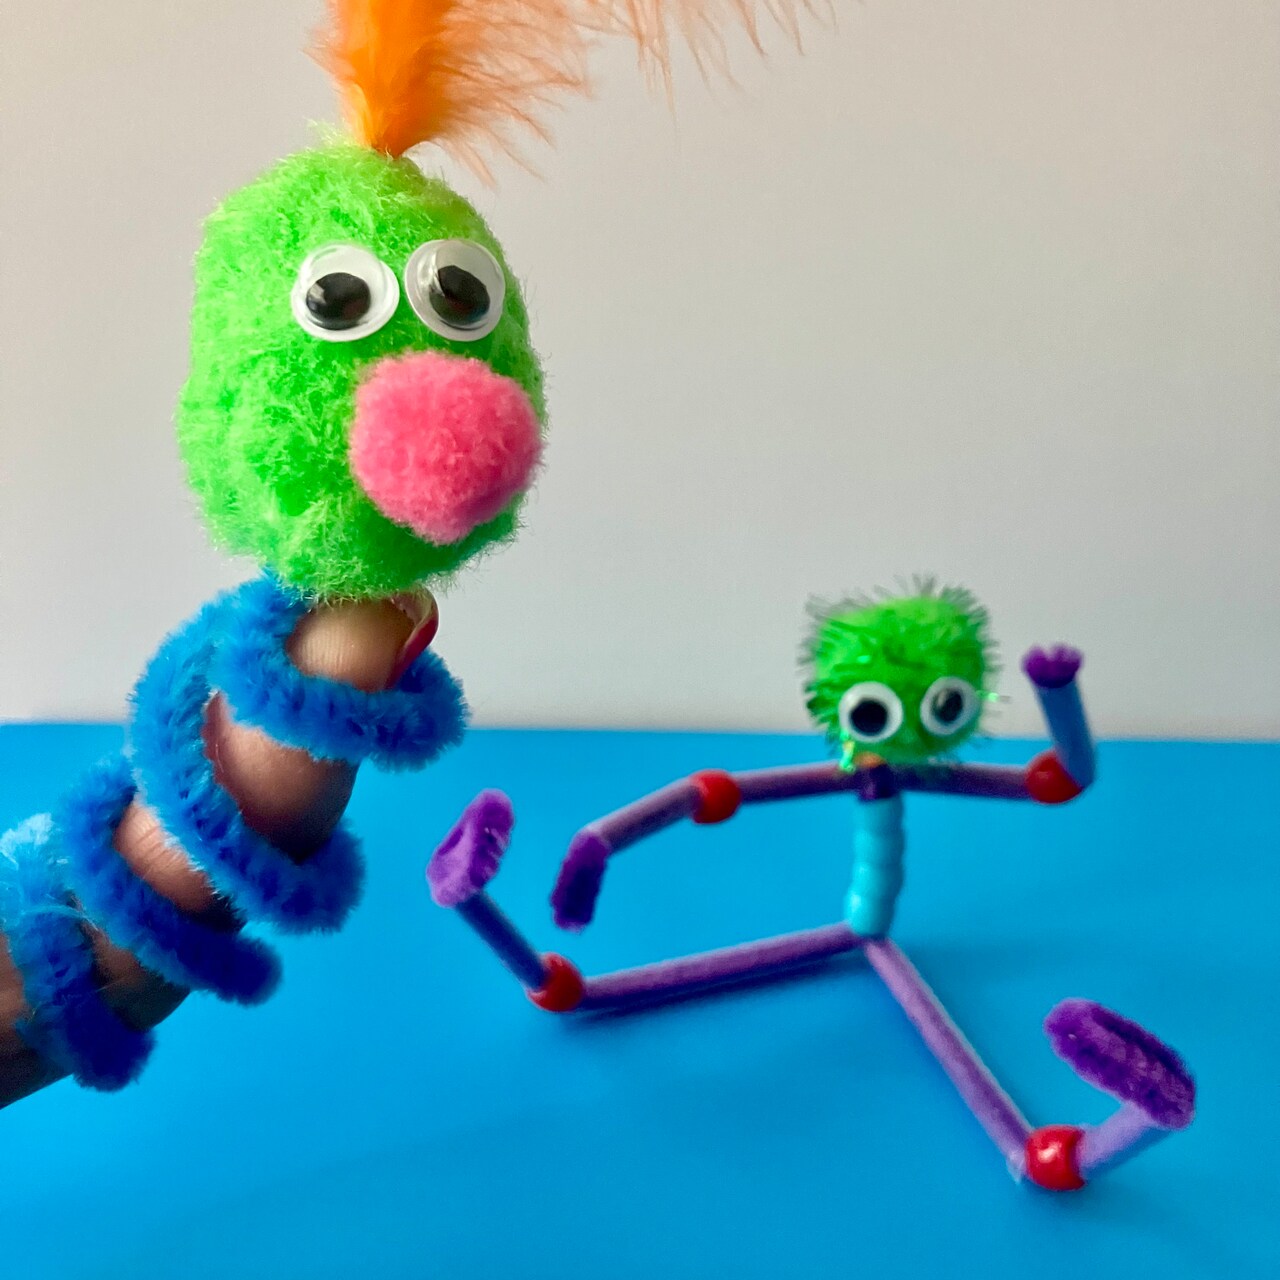 Kids Club: Pipe Cleaner Creations